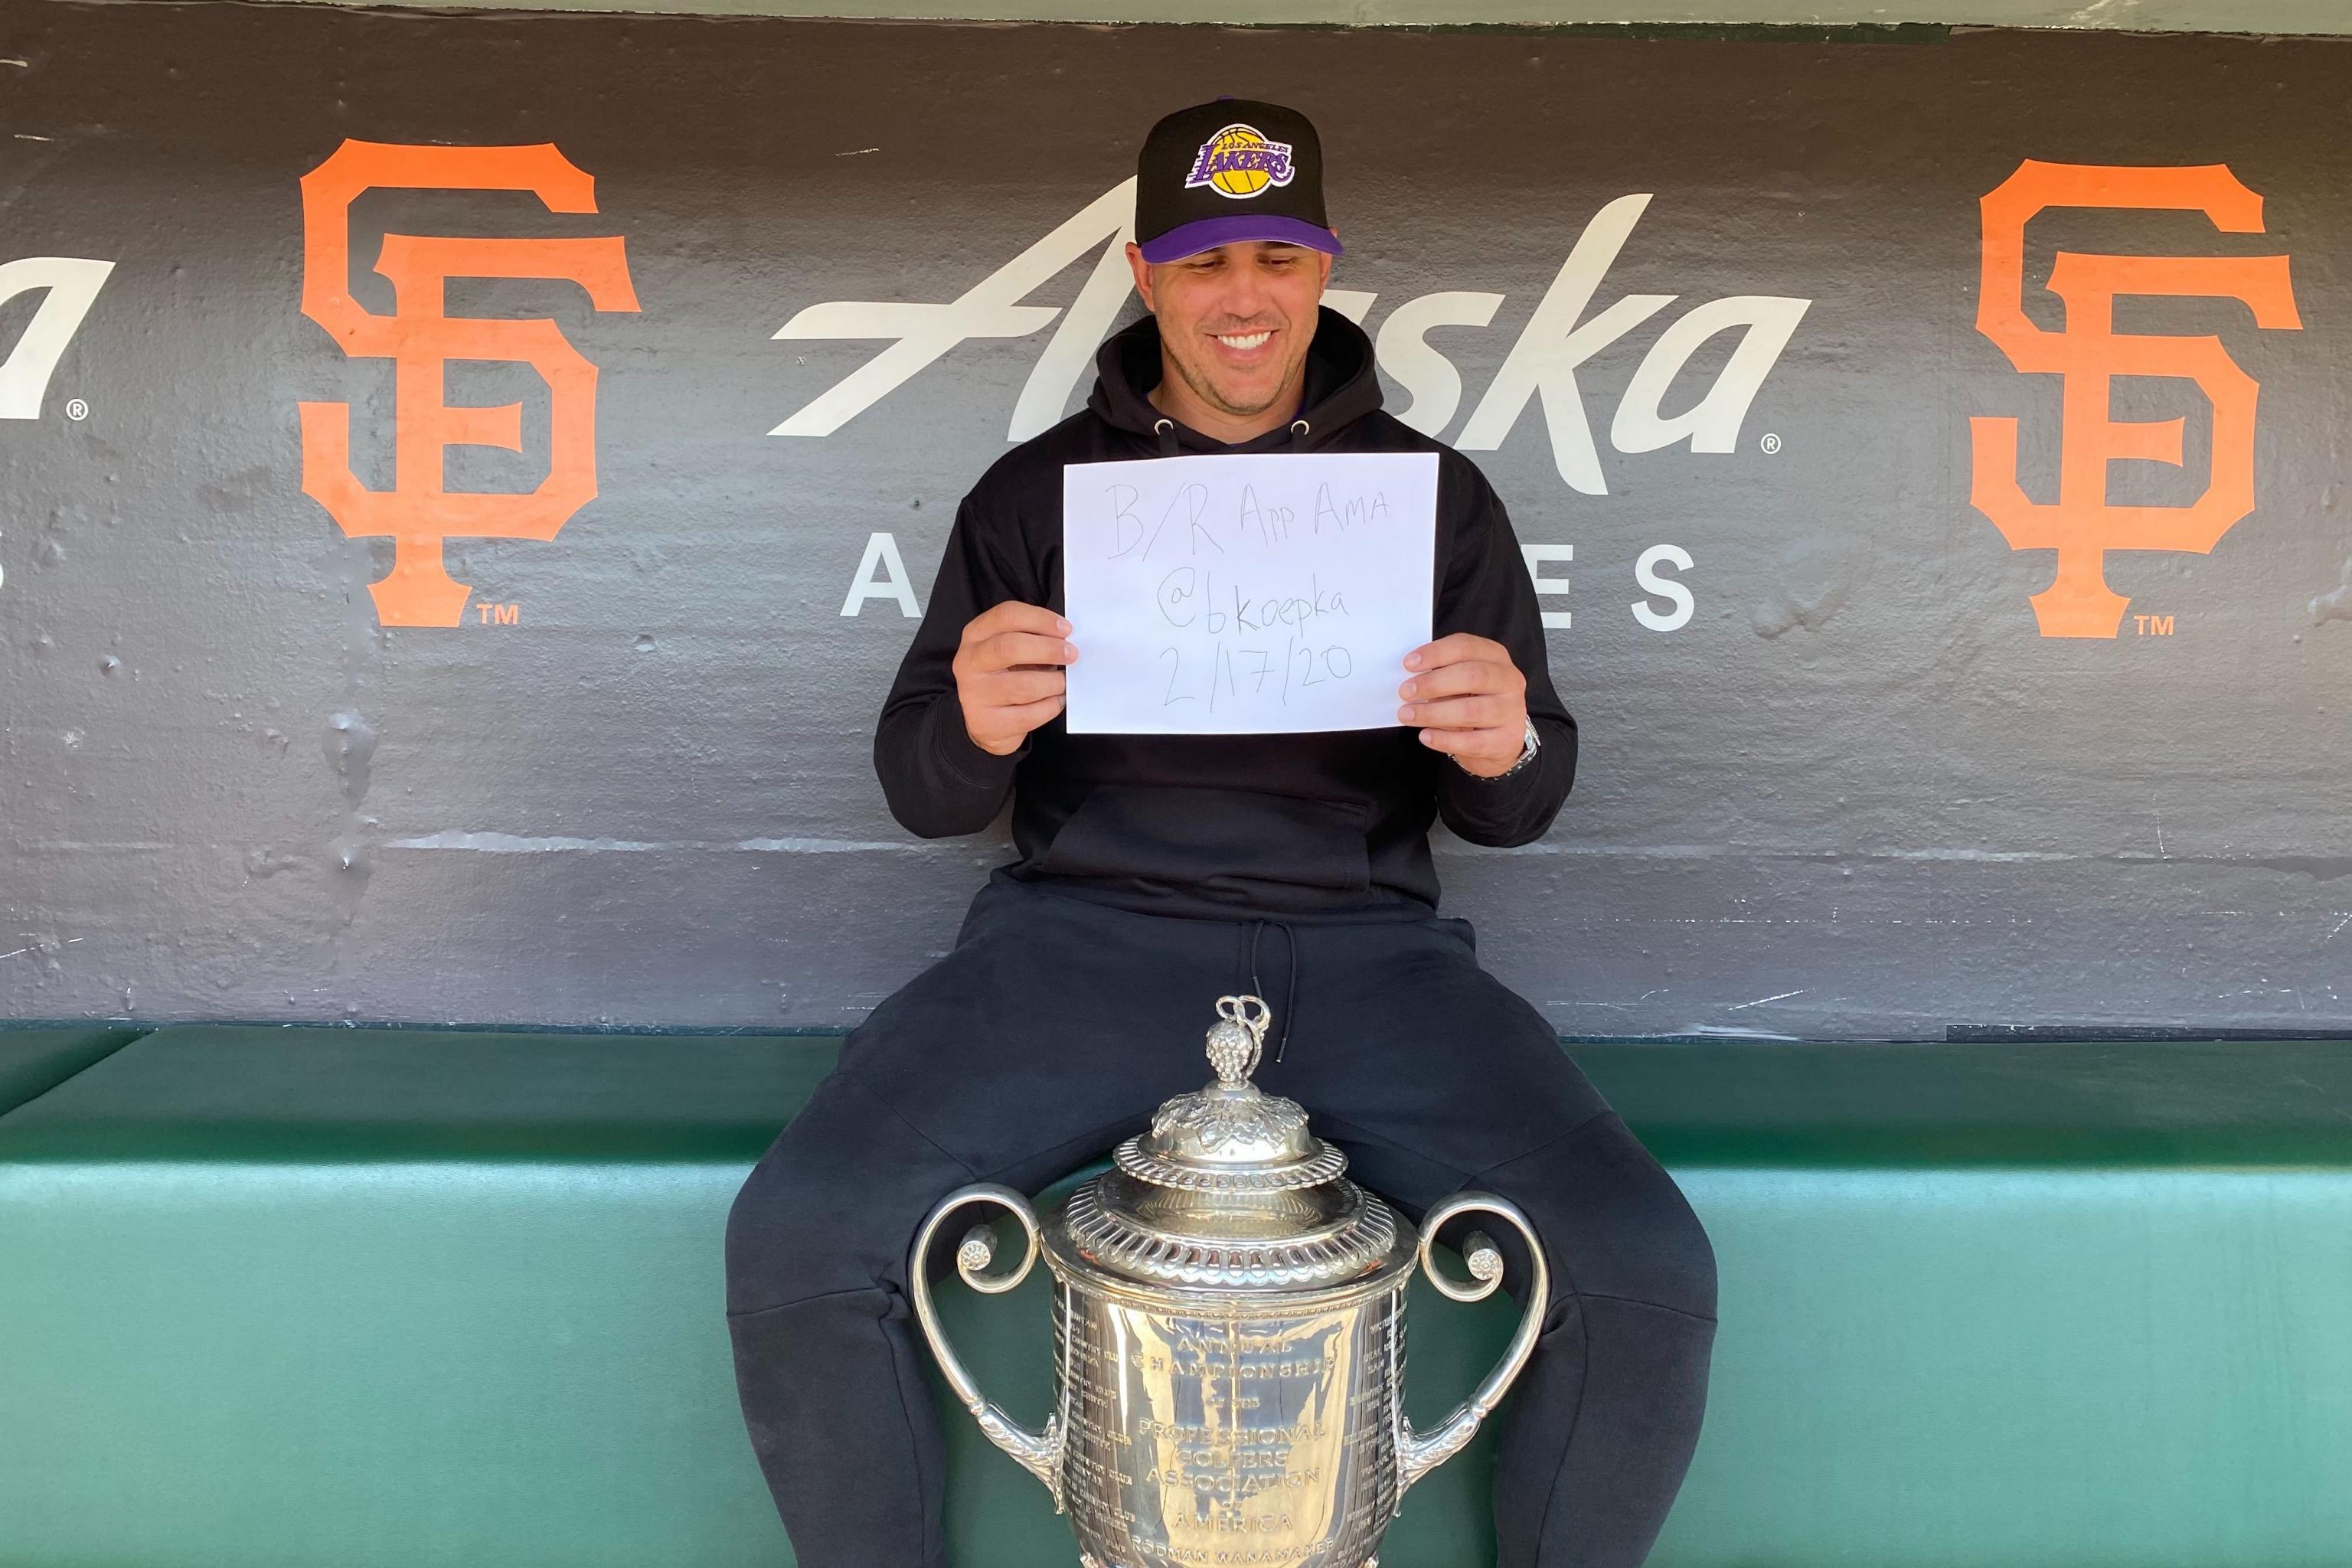 Brooks Koepka Talks Pga Championship Tiger Woods And More In B R Ama Bleacher Report Latest News Videos And Highlights